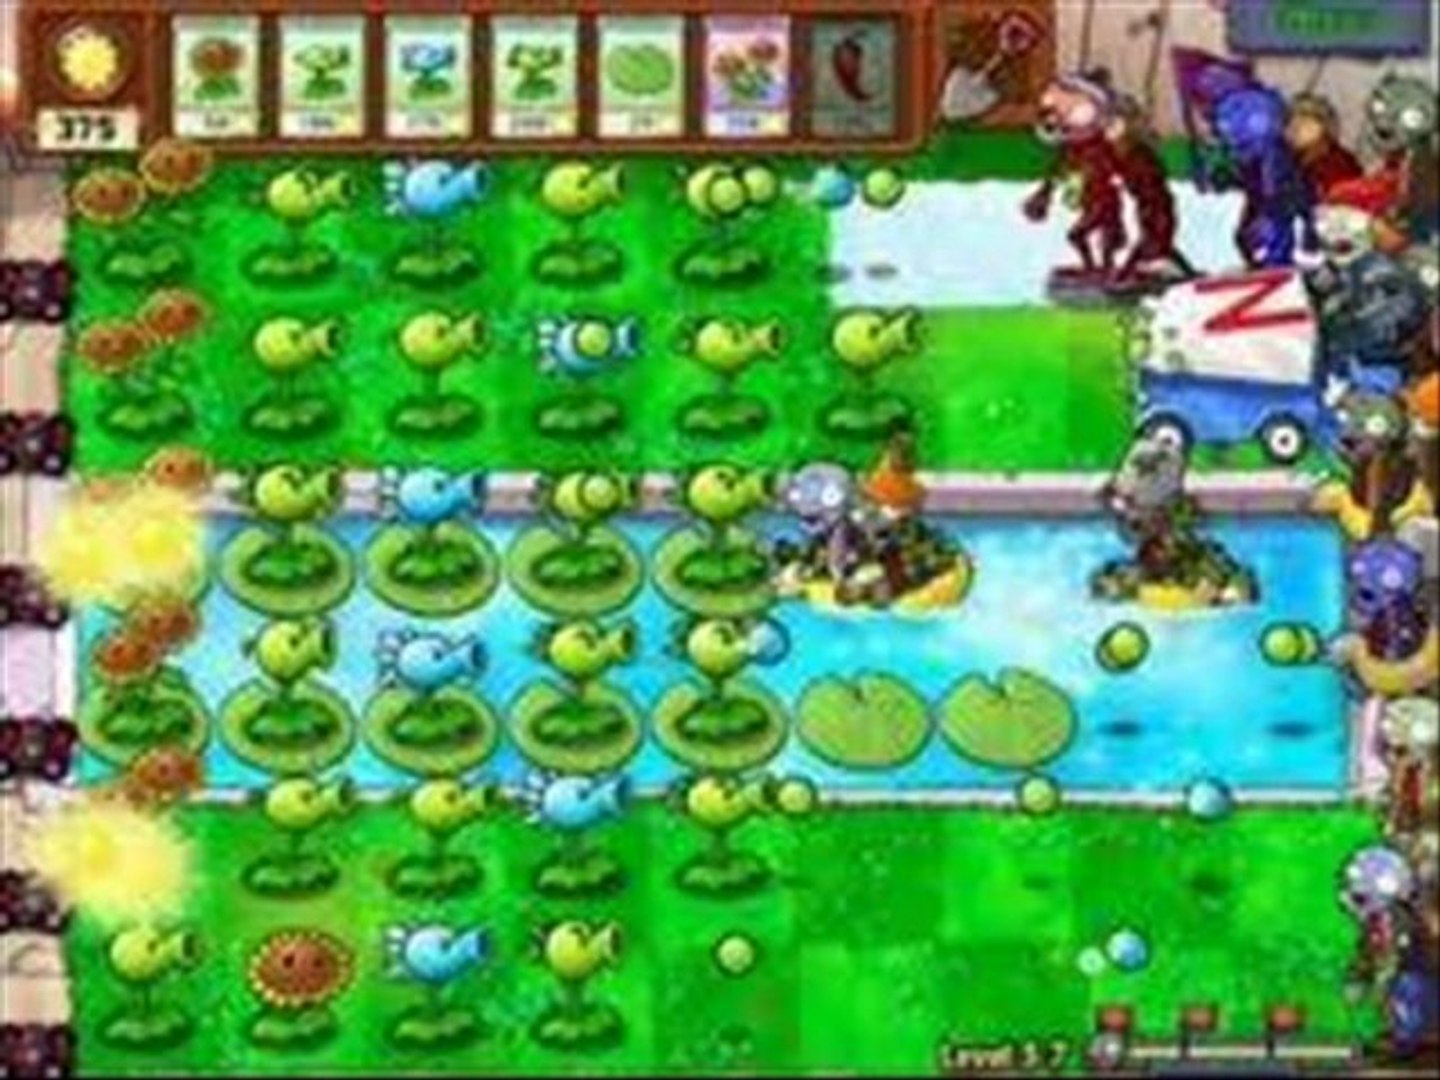 Stream Plants vs. Zombies Zombies on Your lawn by Crumkid4